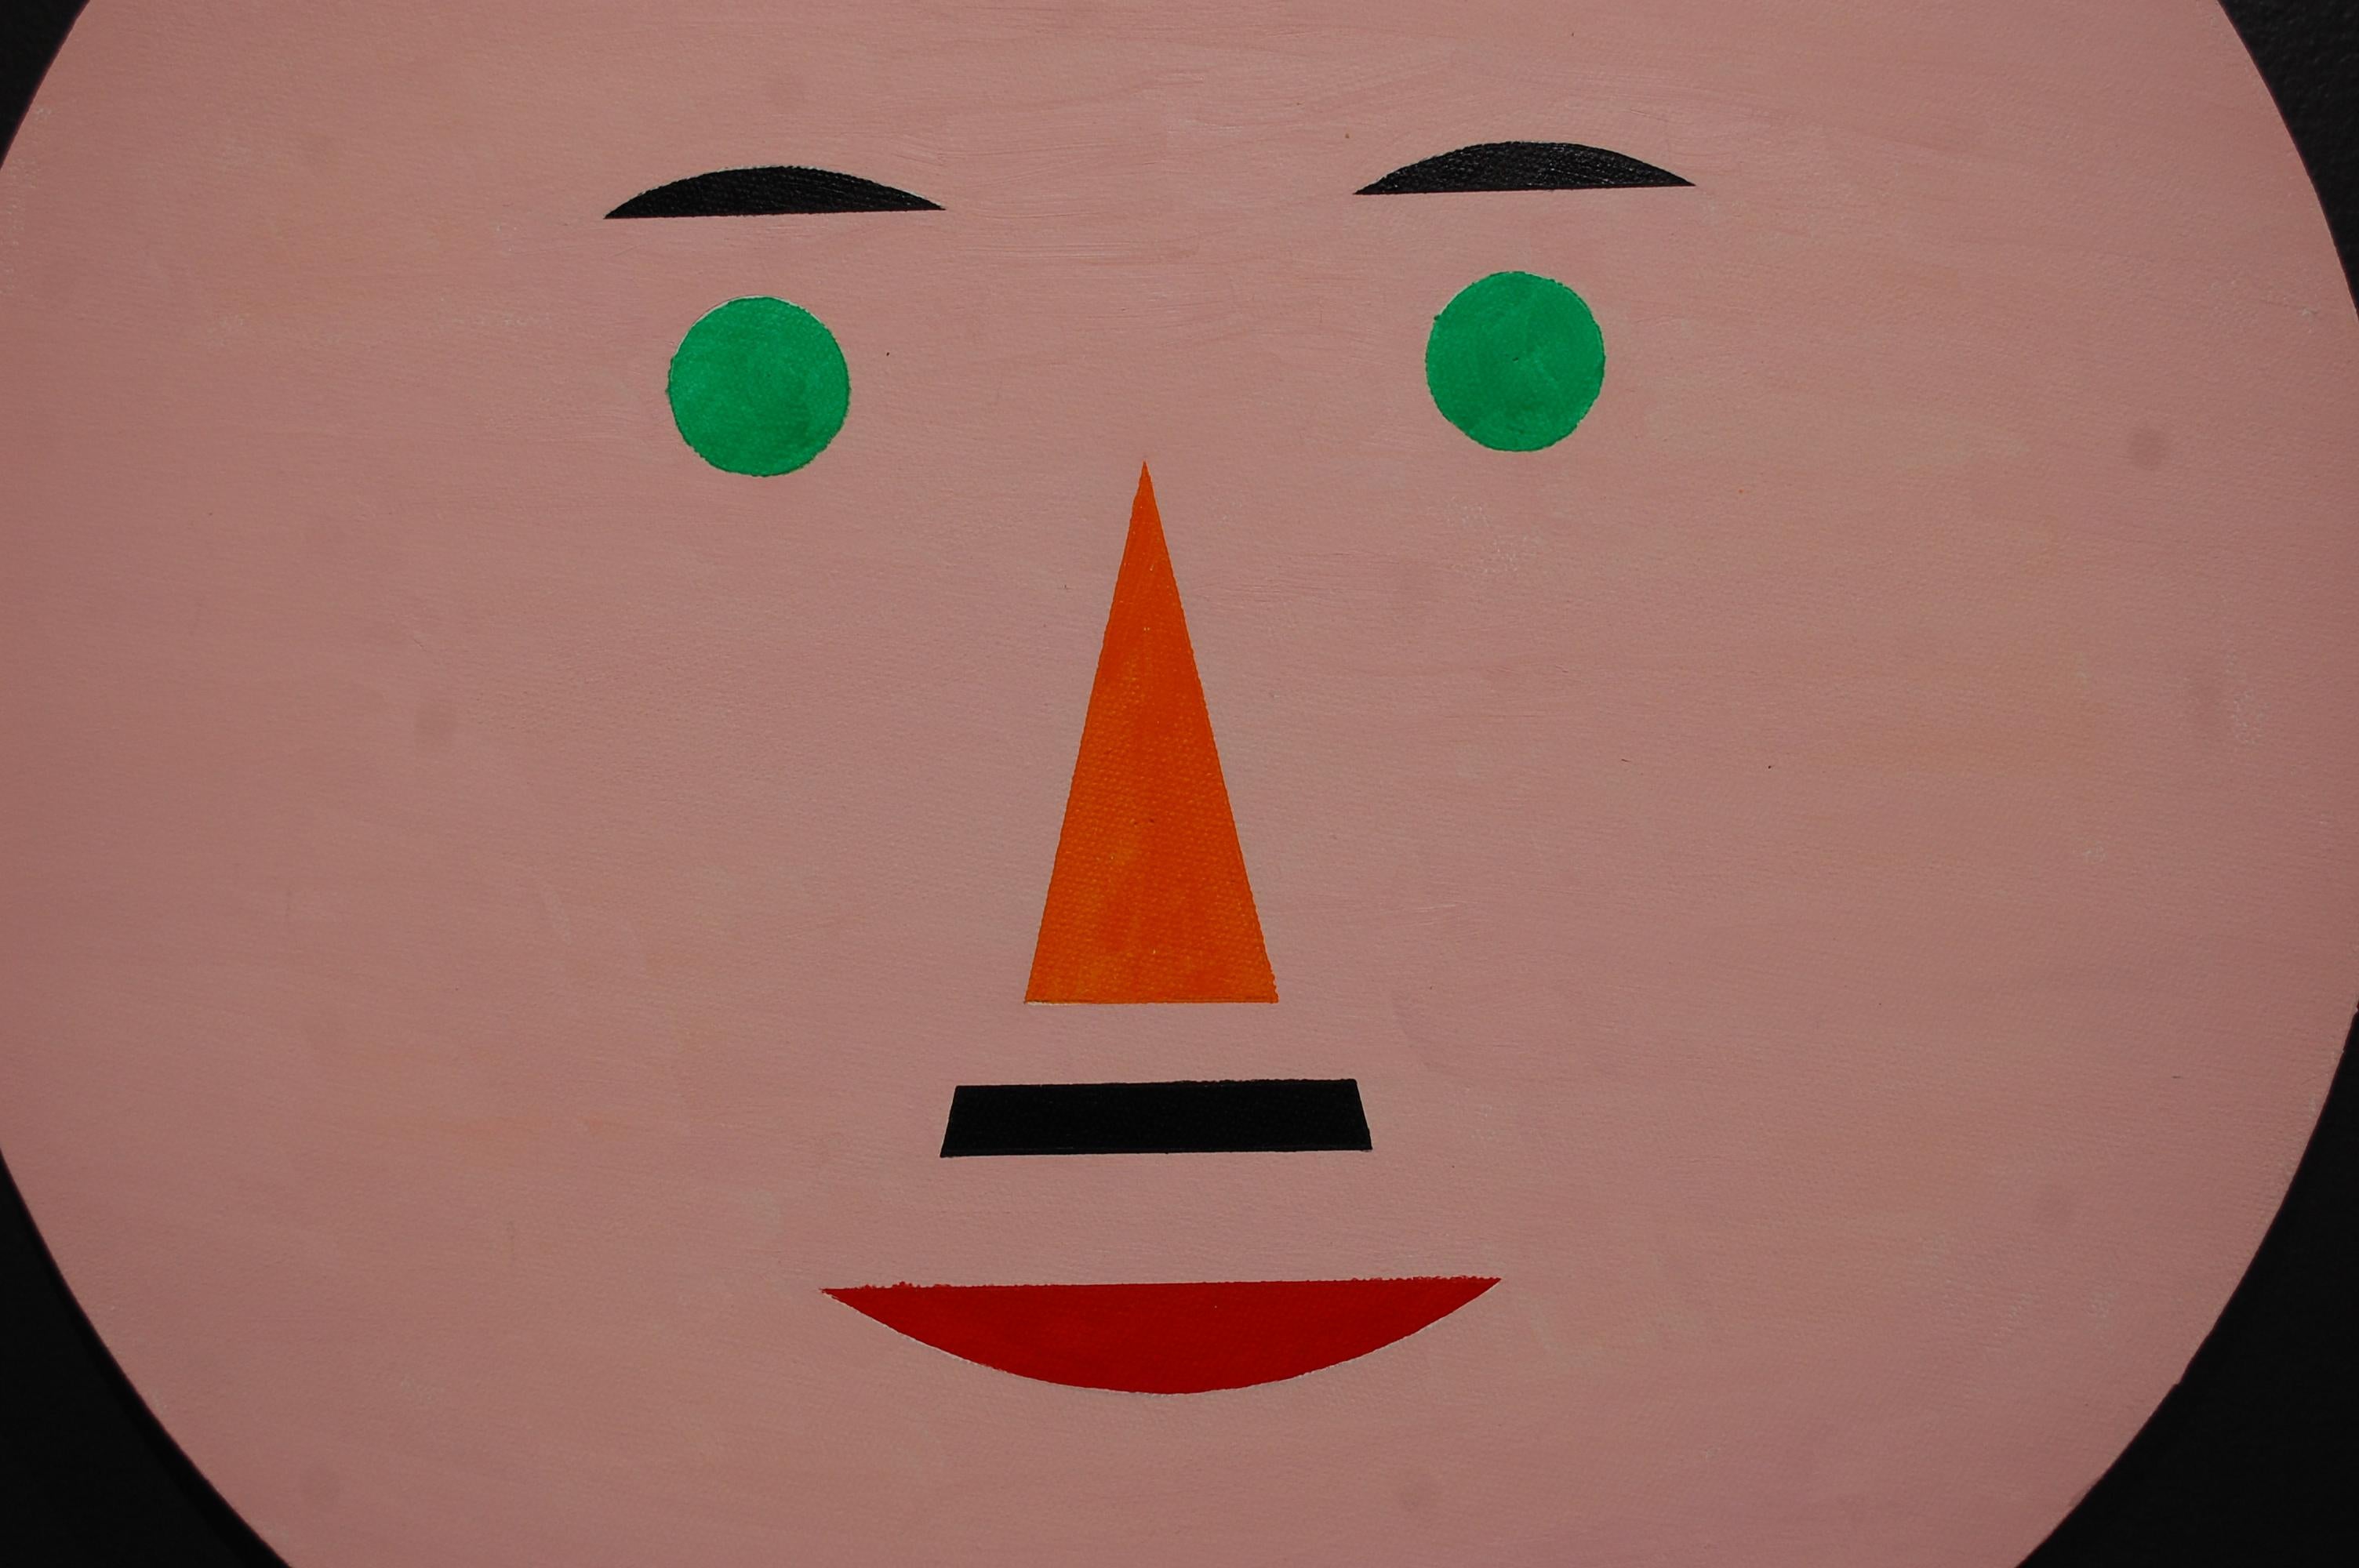 Smile And Be Happy #2 - Painting by Jaro